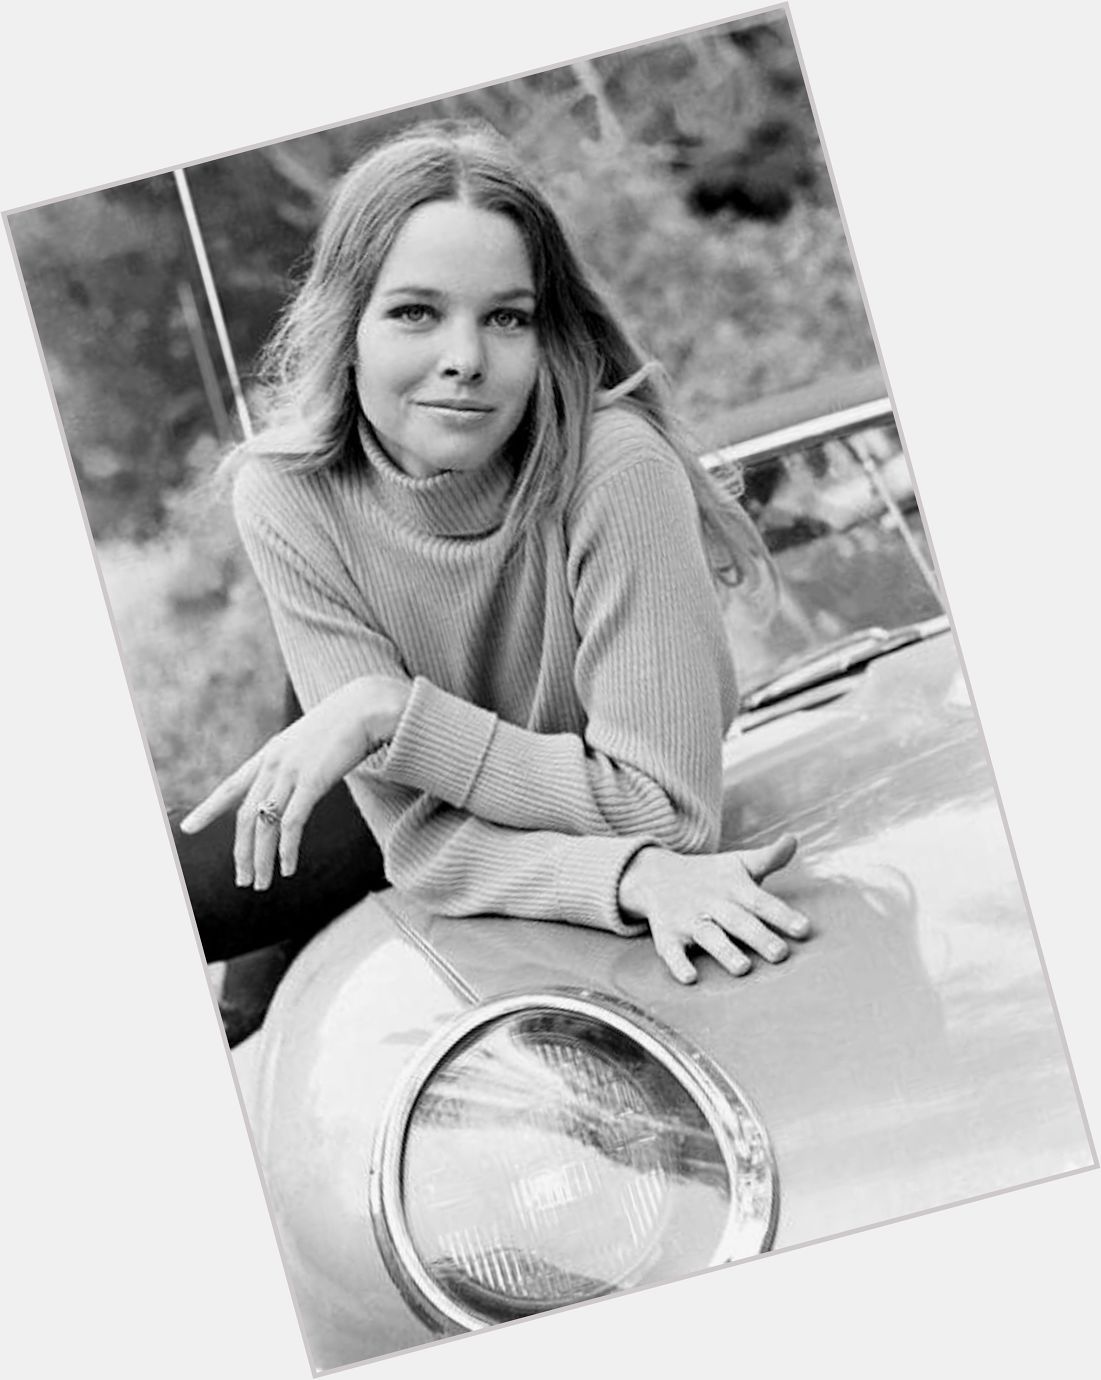 Happy 77th birthday to Michelle Phillips of the Mamas and Papas. c. 1966 